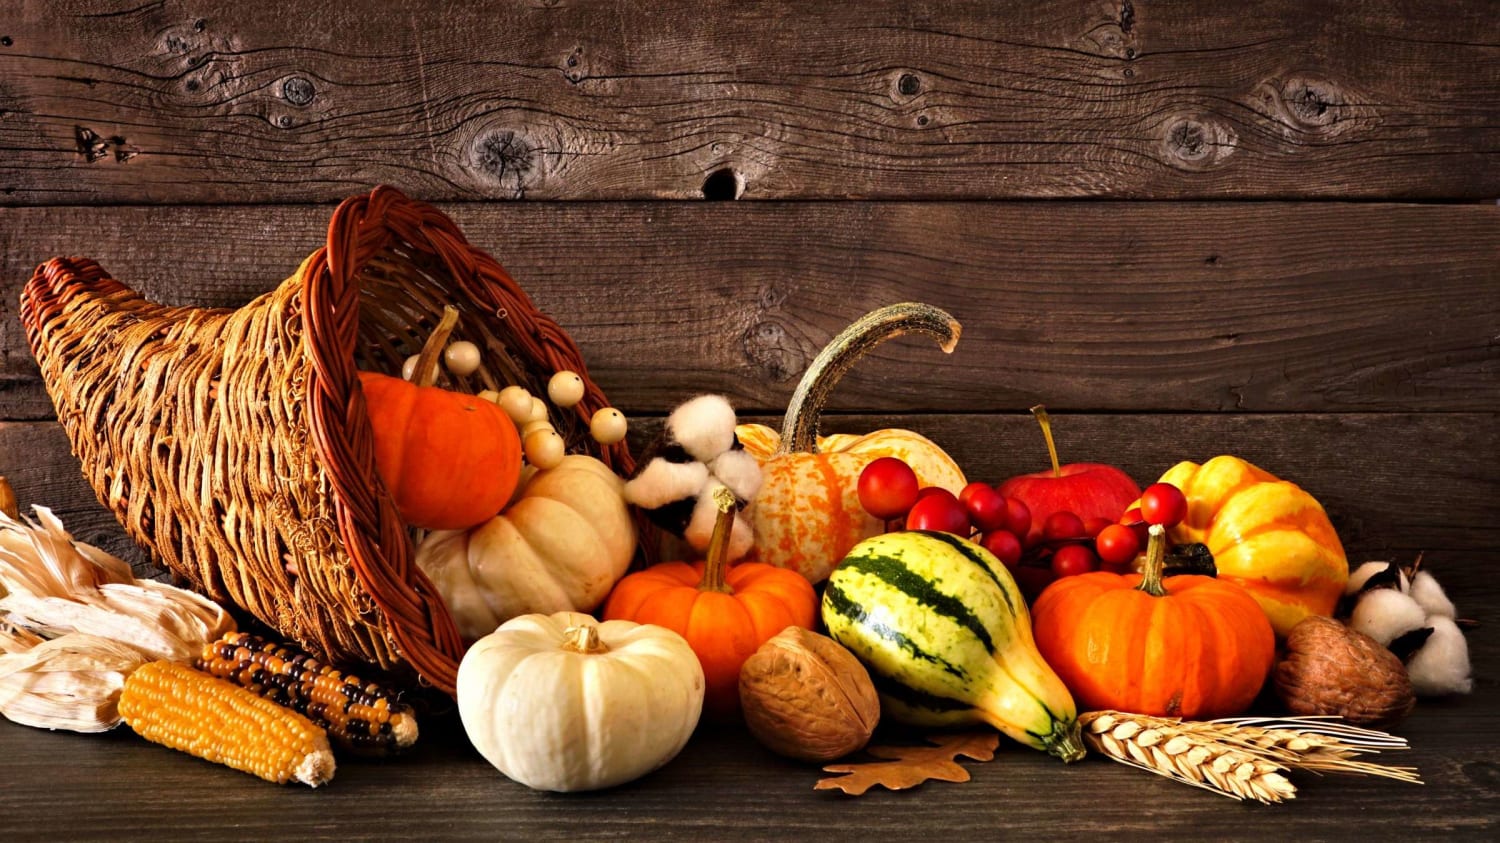 61 Festive Facts About Thanksgiving